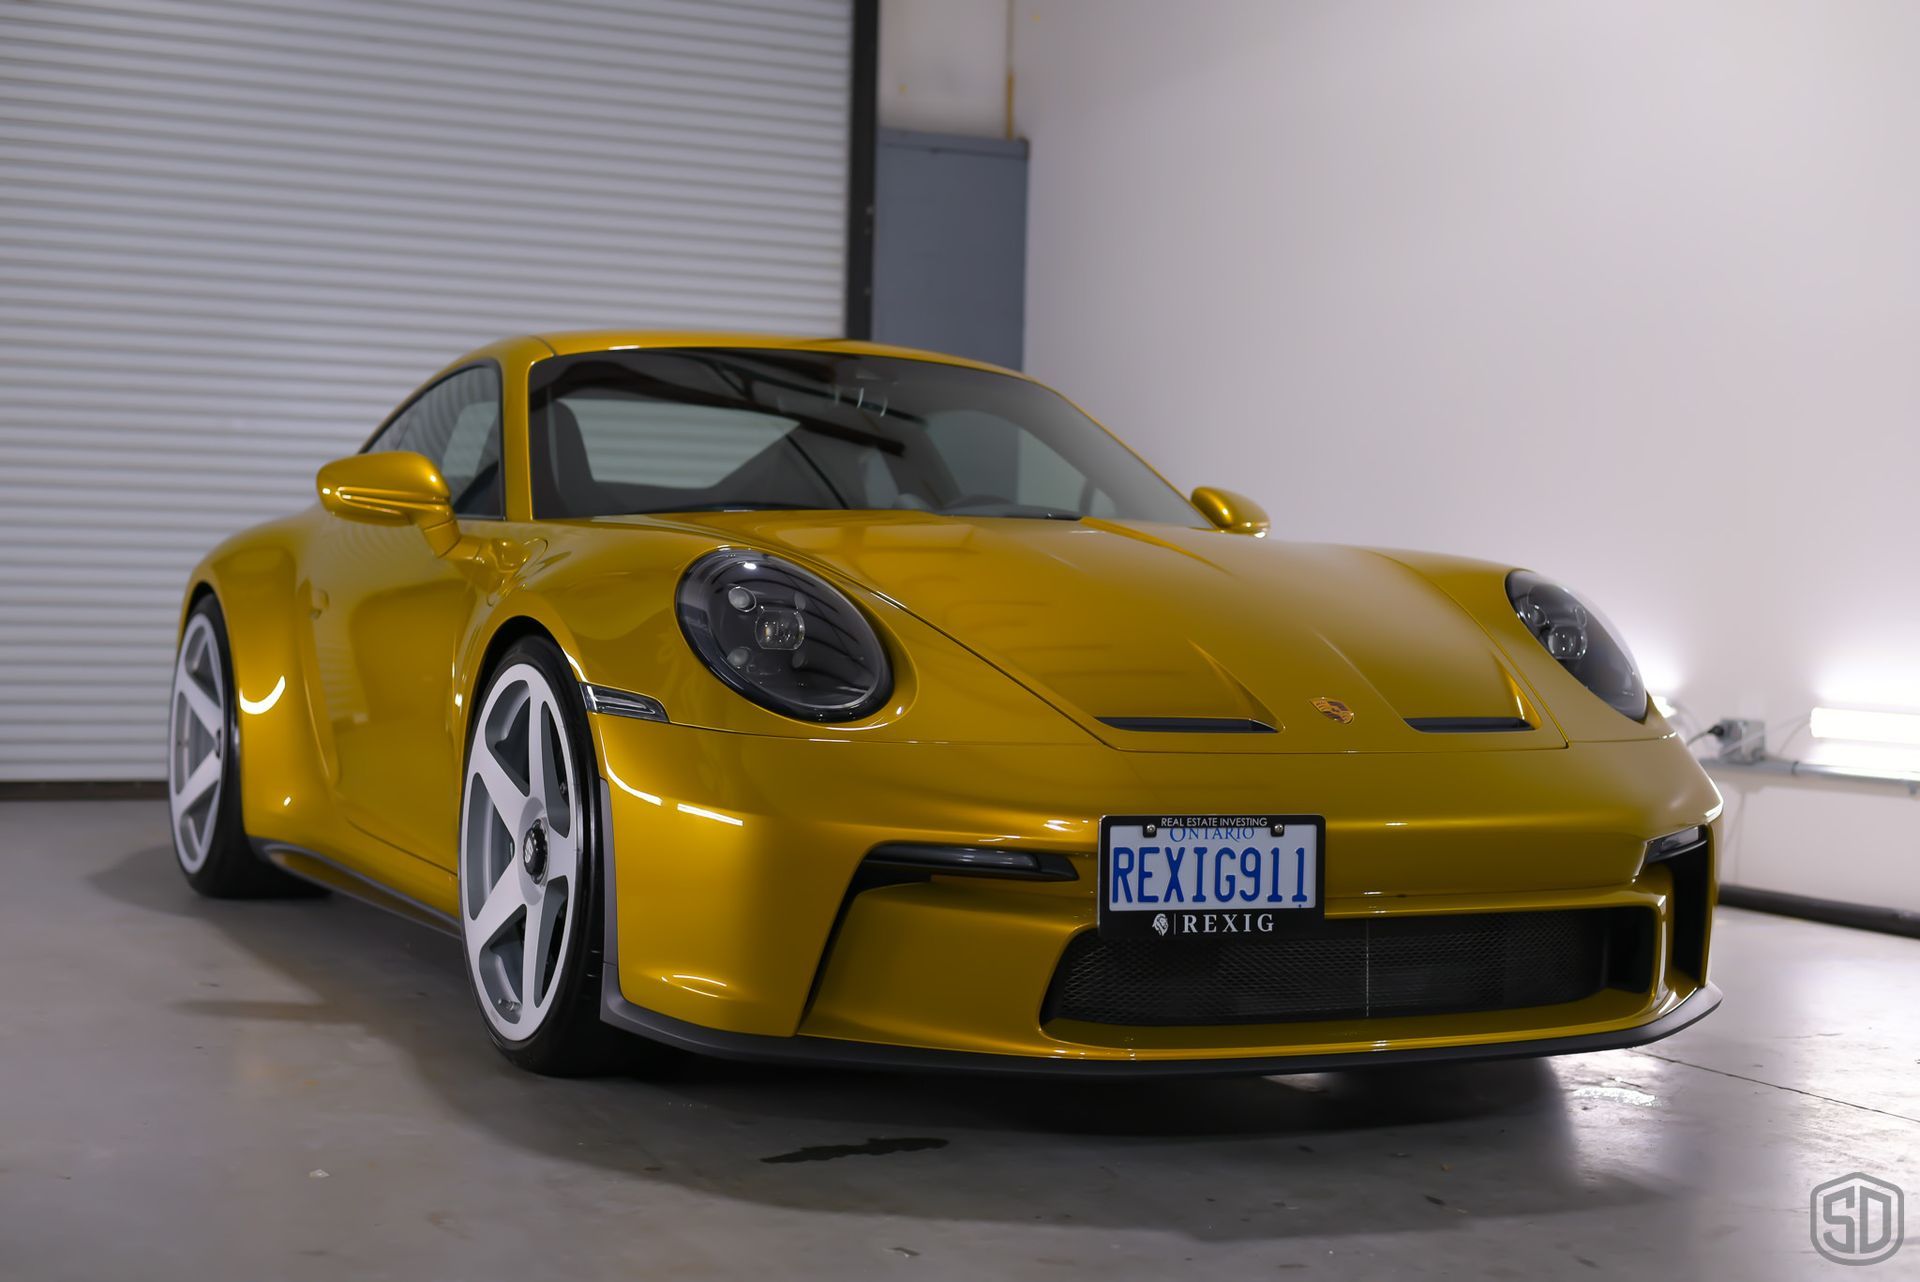 Who wants to see more of this stunning 911 GT3 Touring in Chromoflair Gold? Seeing the color in pers